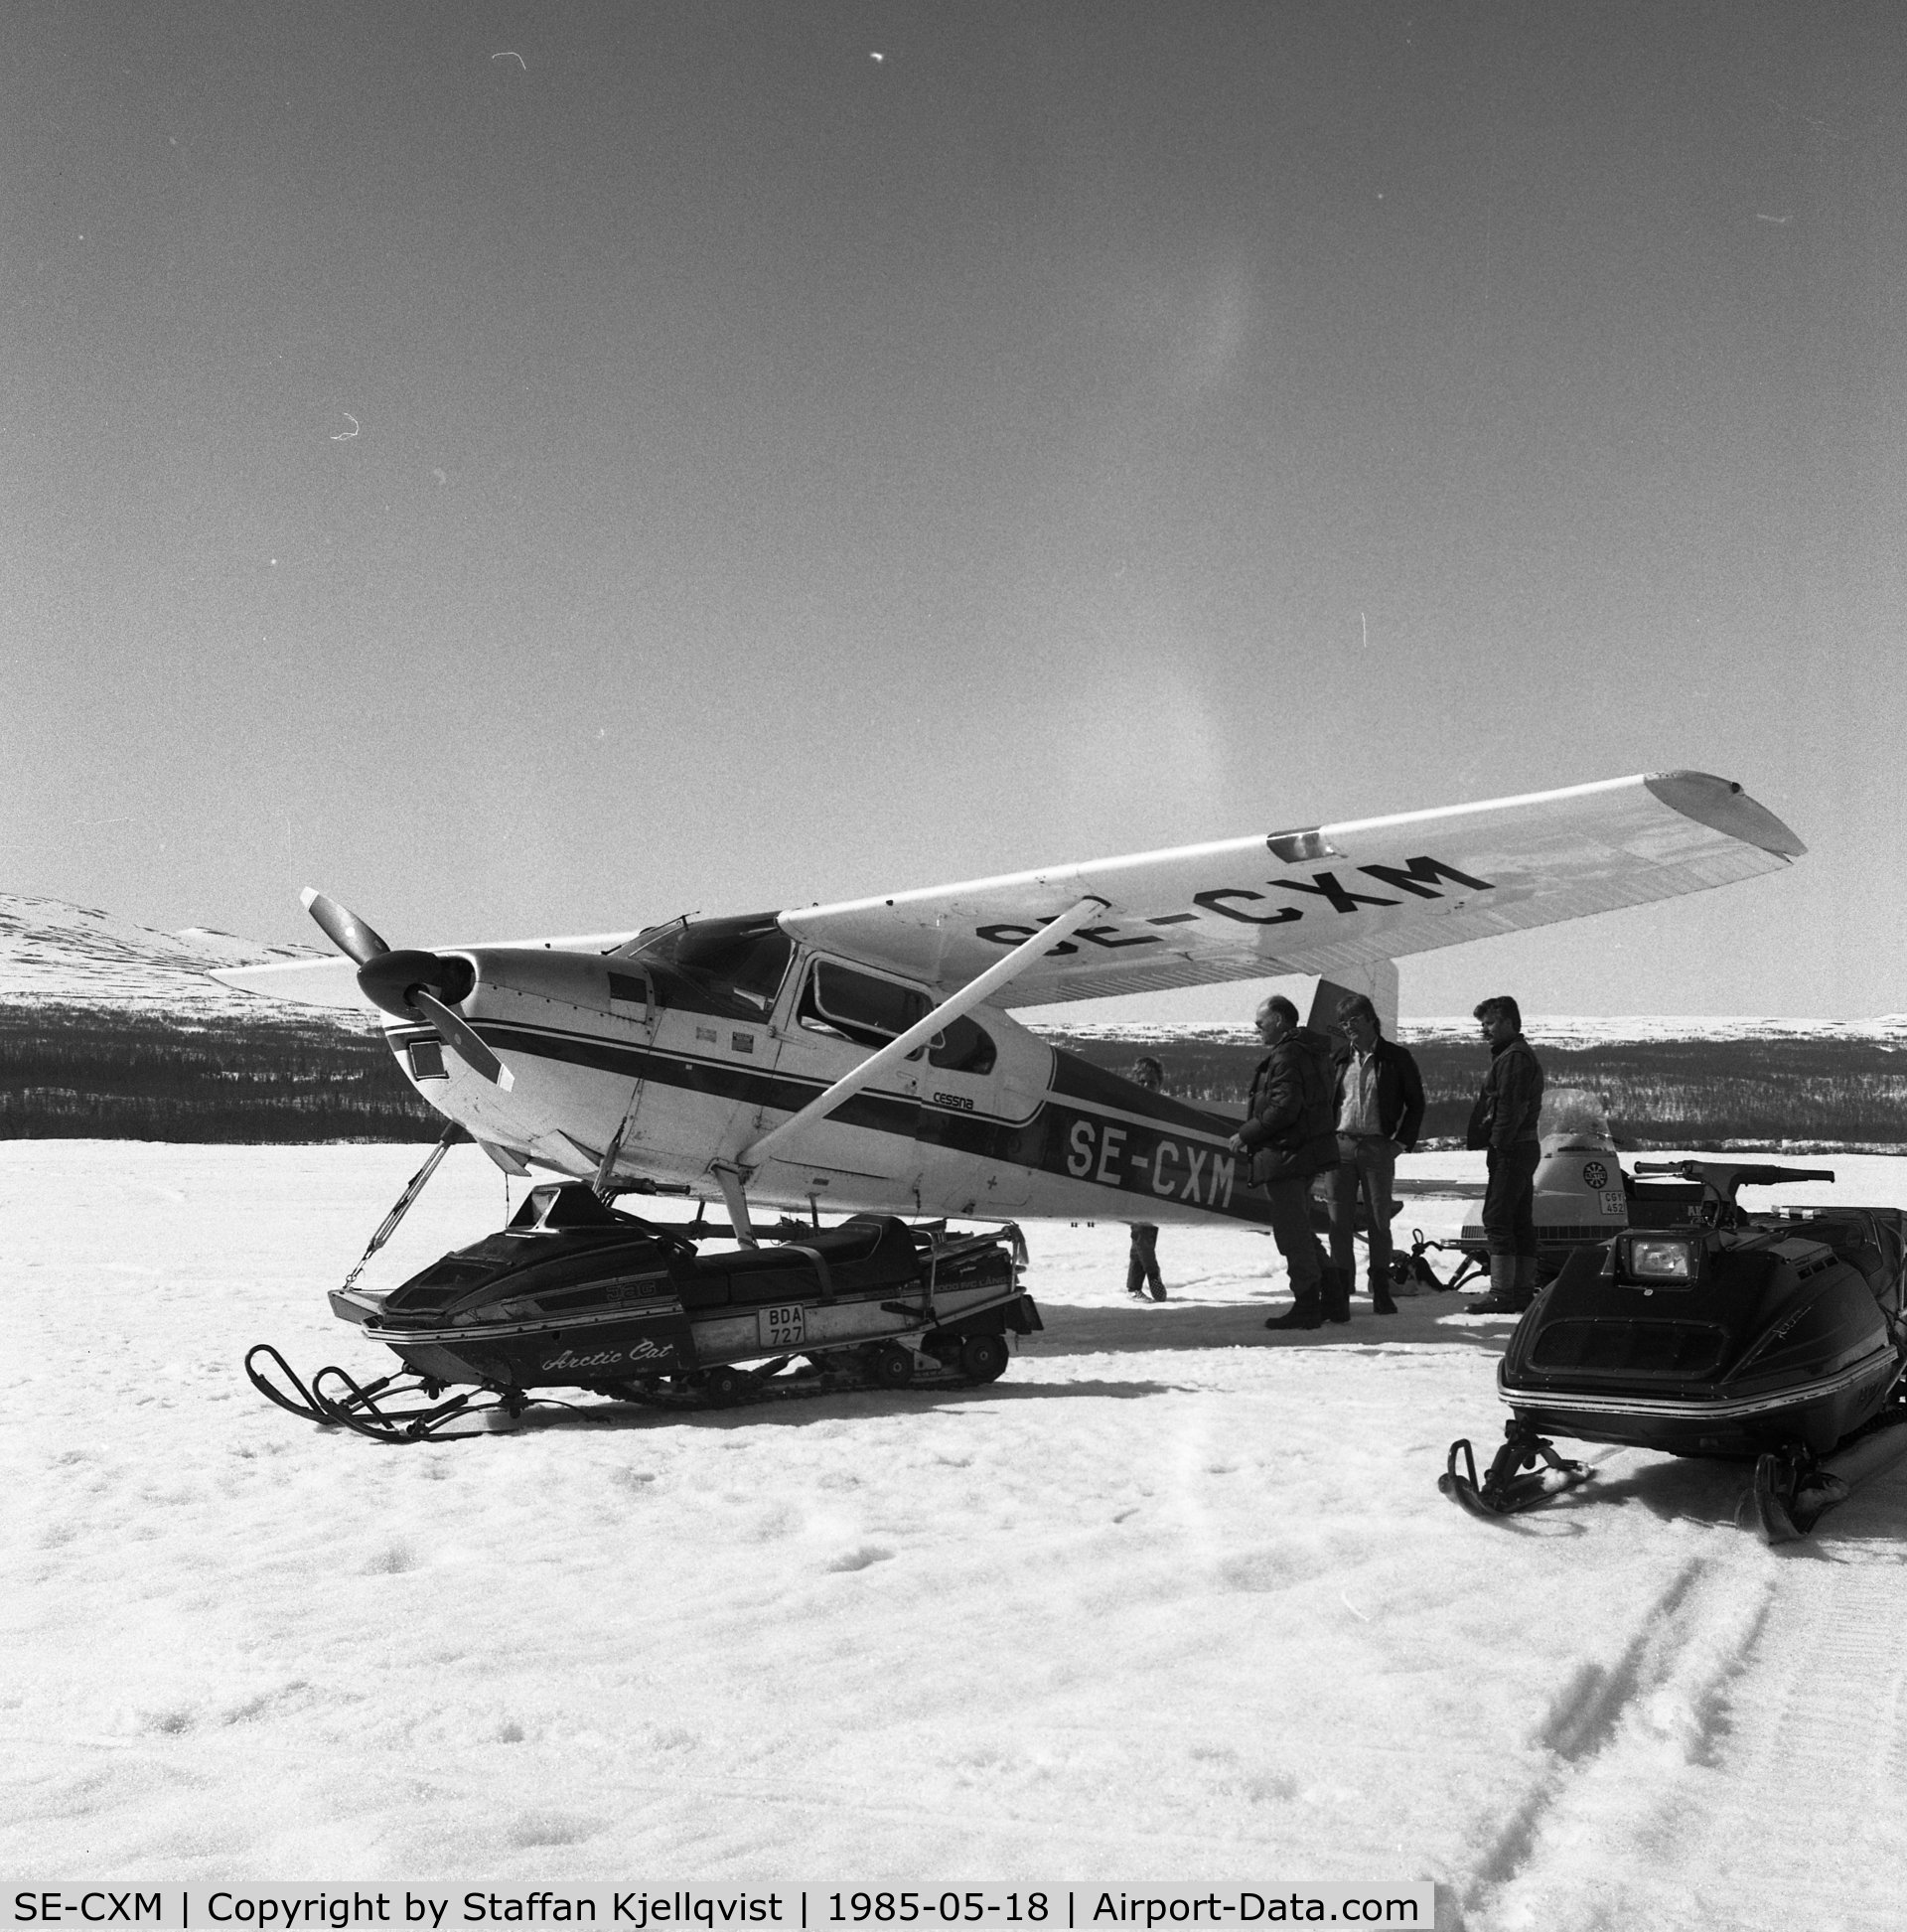 SE-CXM, 1960 Cessna 180D C/N 18050968, Previous SE-CXM at Klimpfjäll Northern Sweden equipped with hydraulic skies and wheels